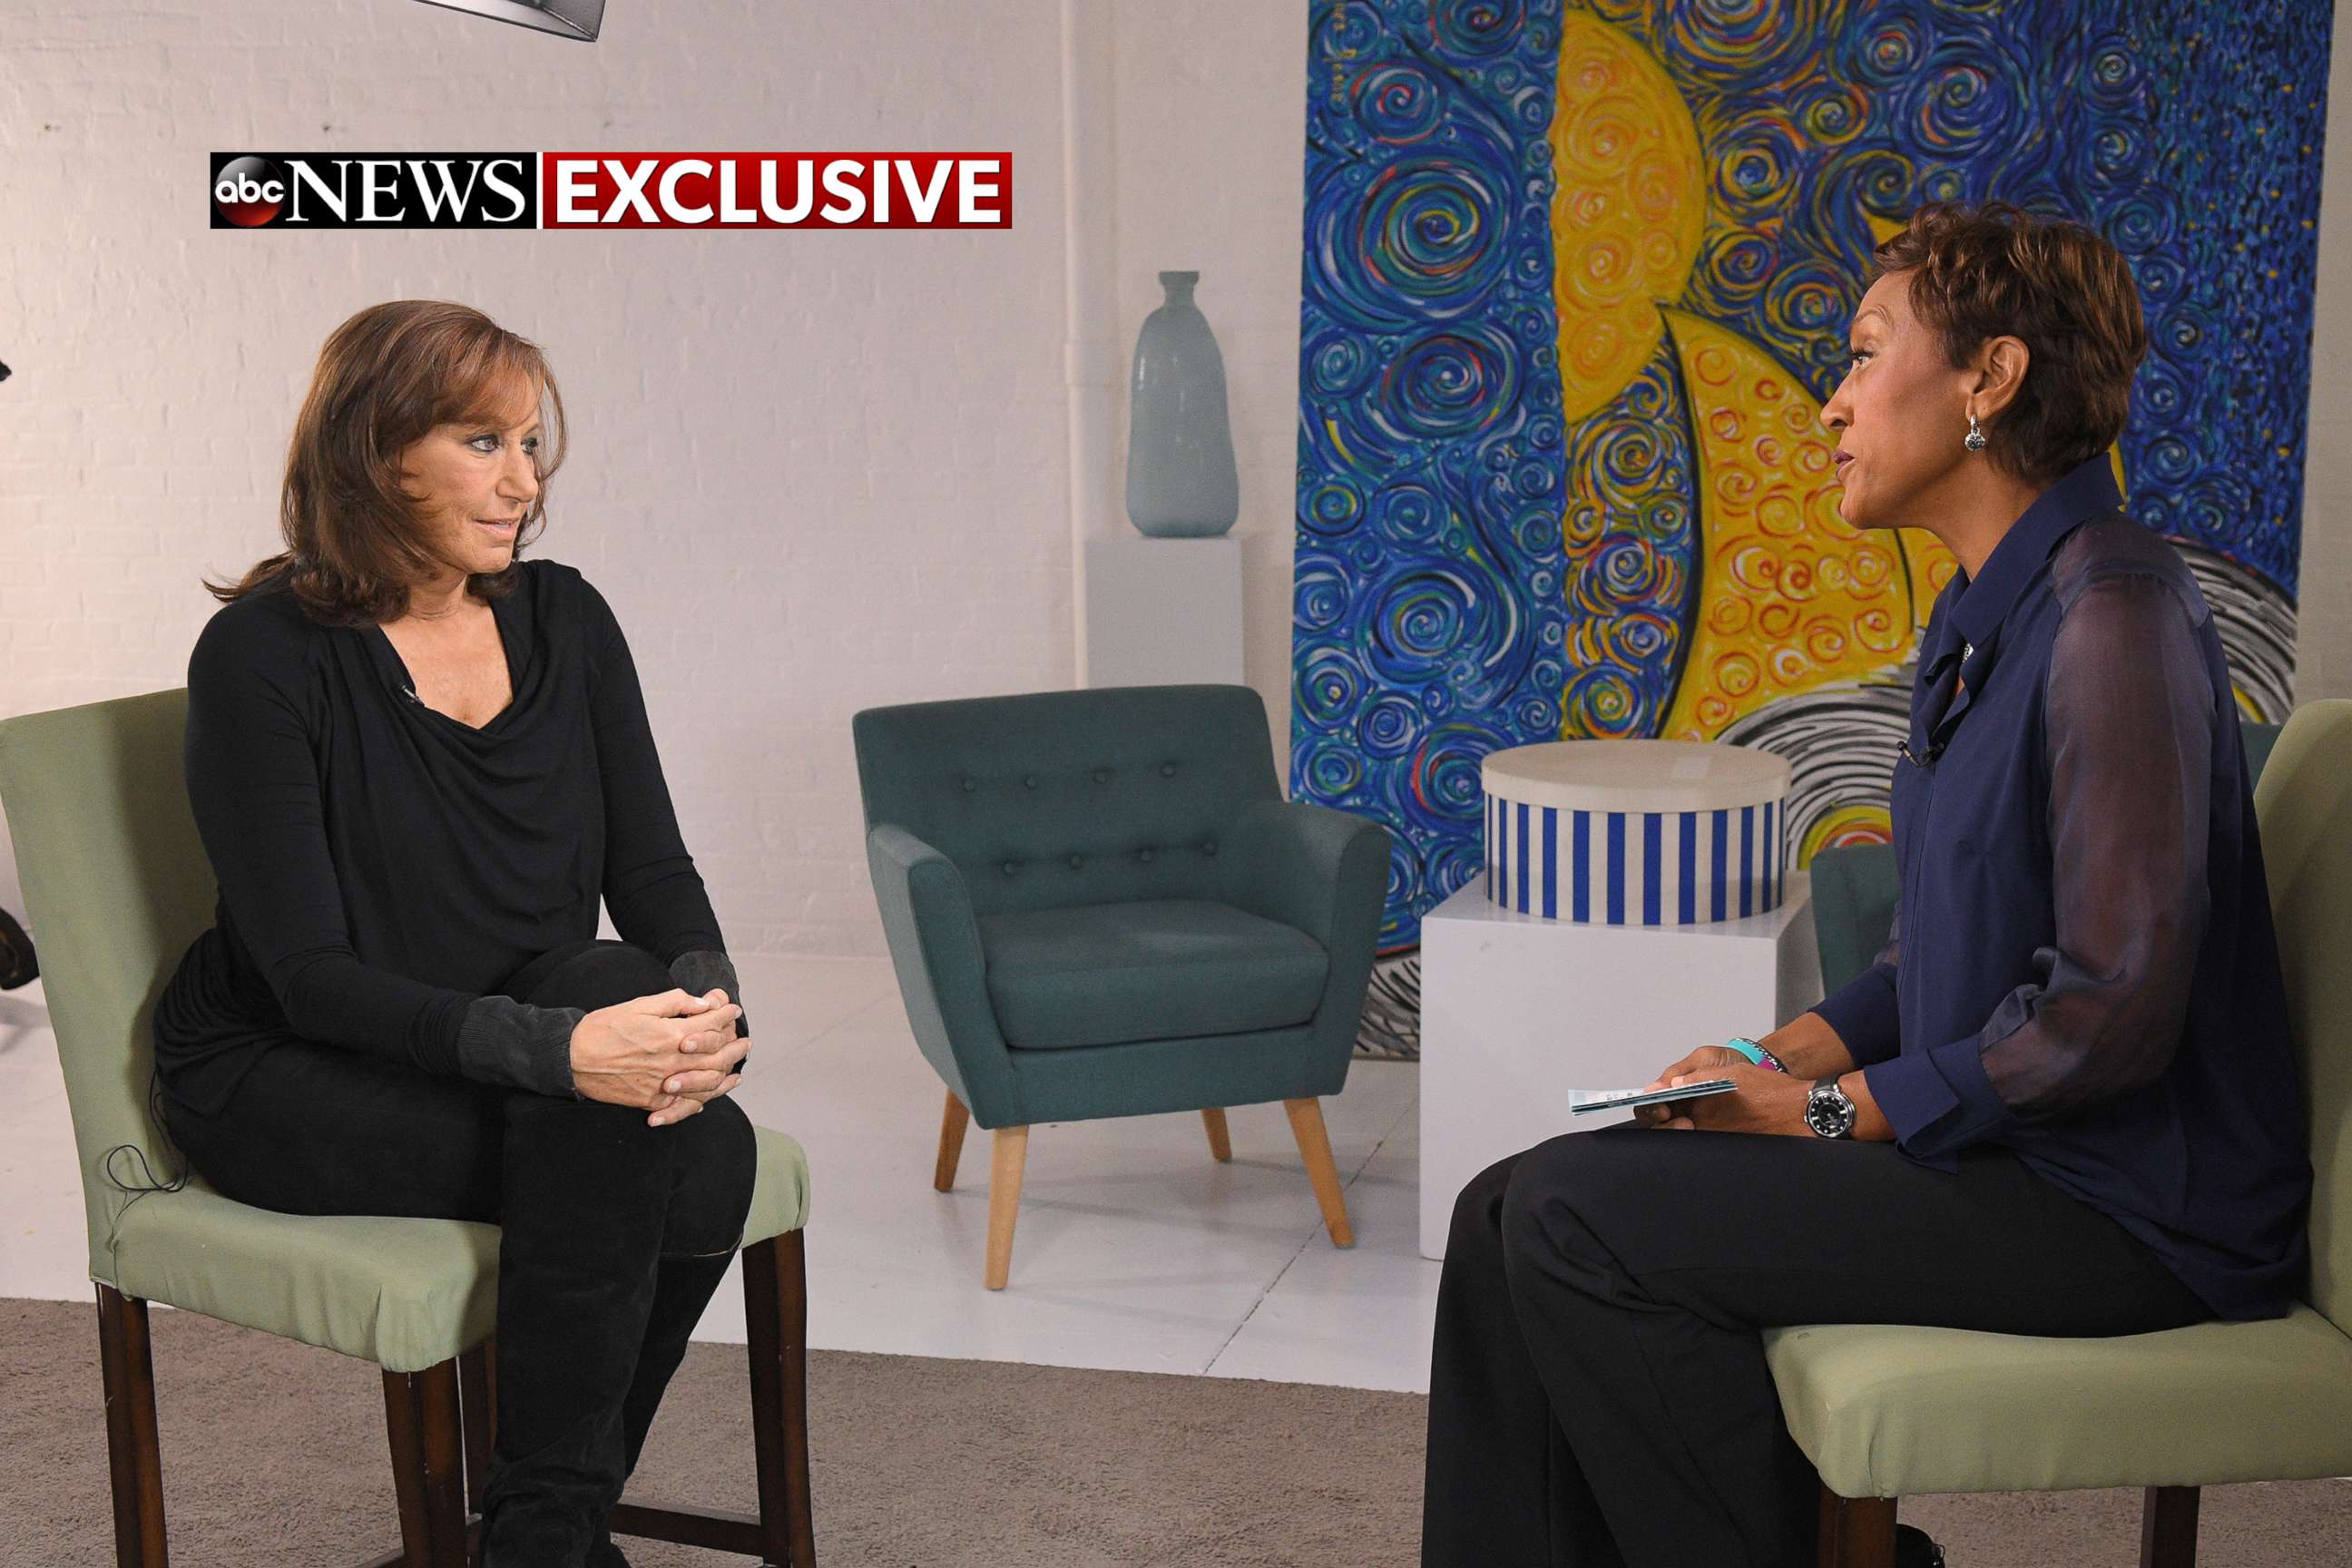 PHOTO: Fashion designer Donna Karan responded to the backlash she faced over her comments on the Harvey Weinstein scandal in an interview with ABC News' Robin Roberts.